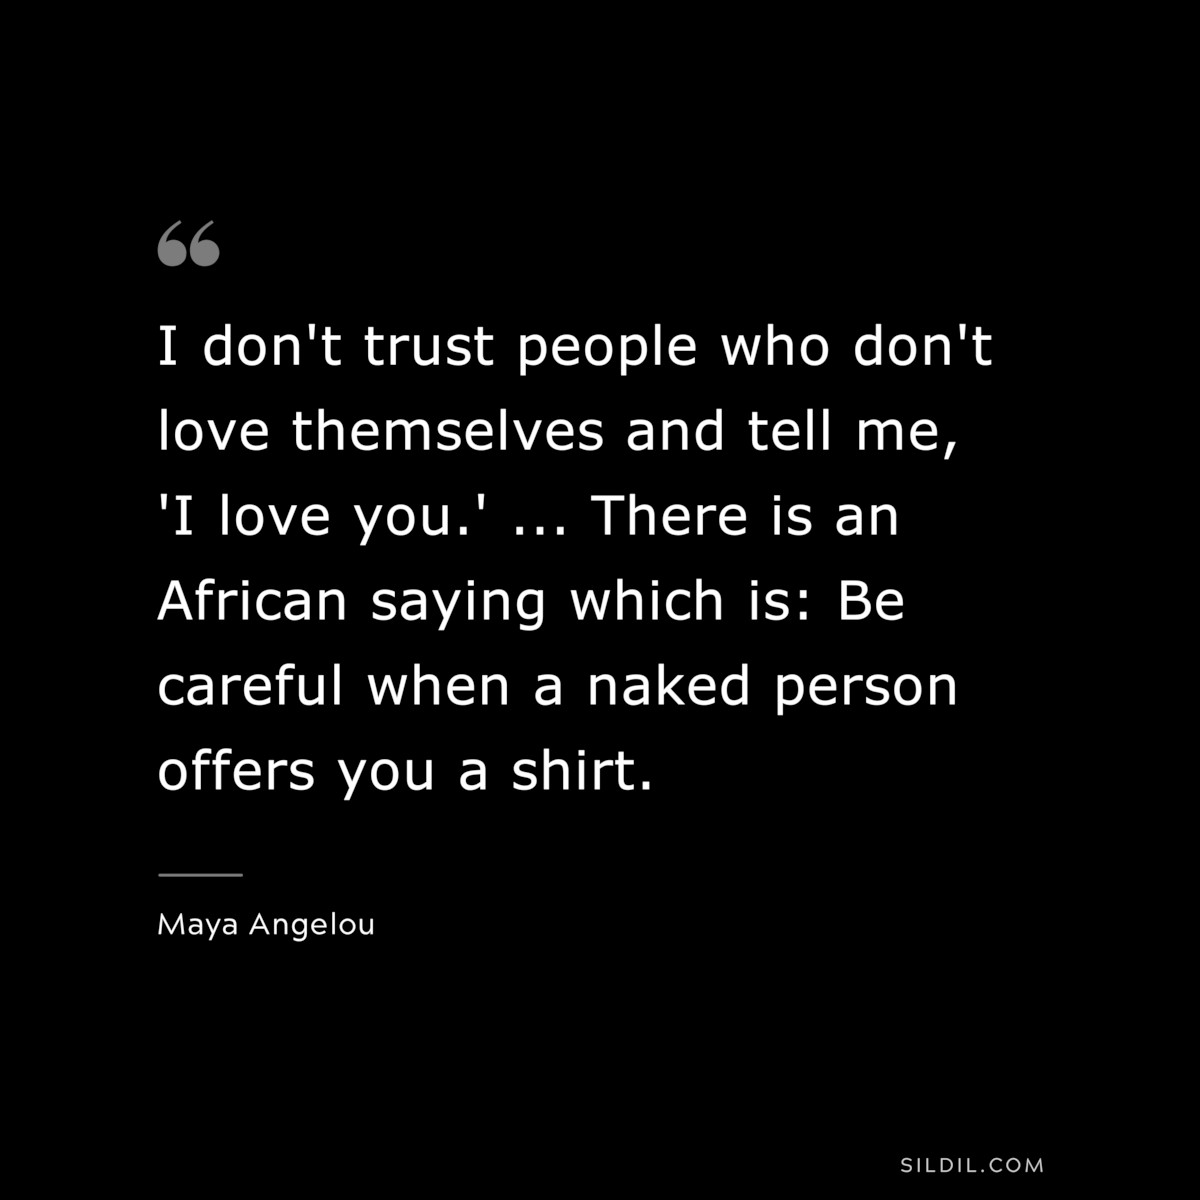 I don't trust people who don't love themselves and tell me, 'I love you.' ... There is an African saying which is: Be careful when a naked person offers you a shirt. ― Maya Angelou